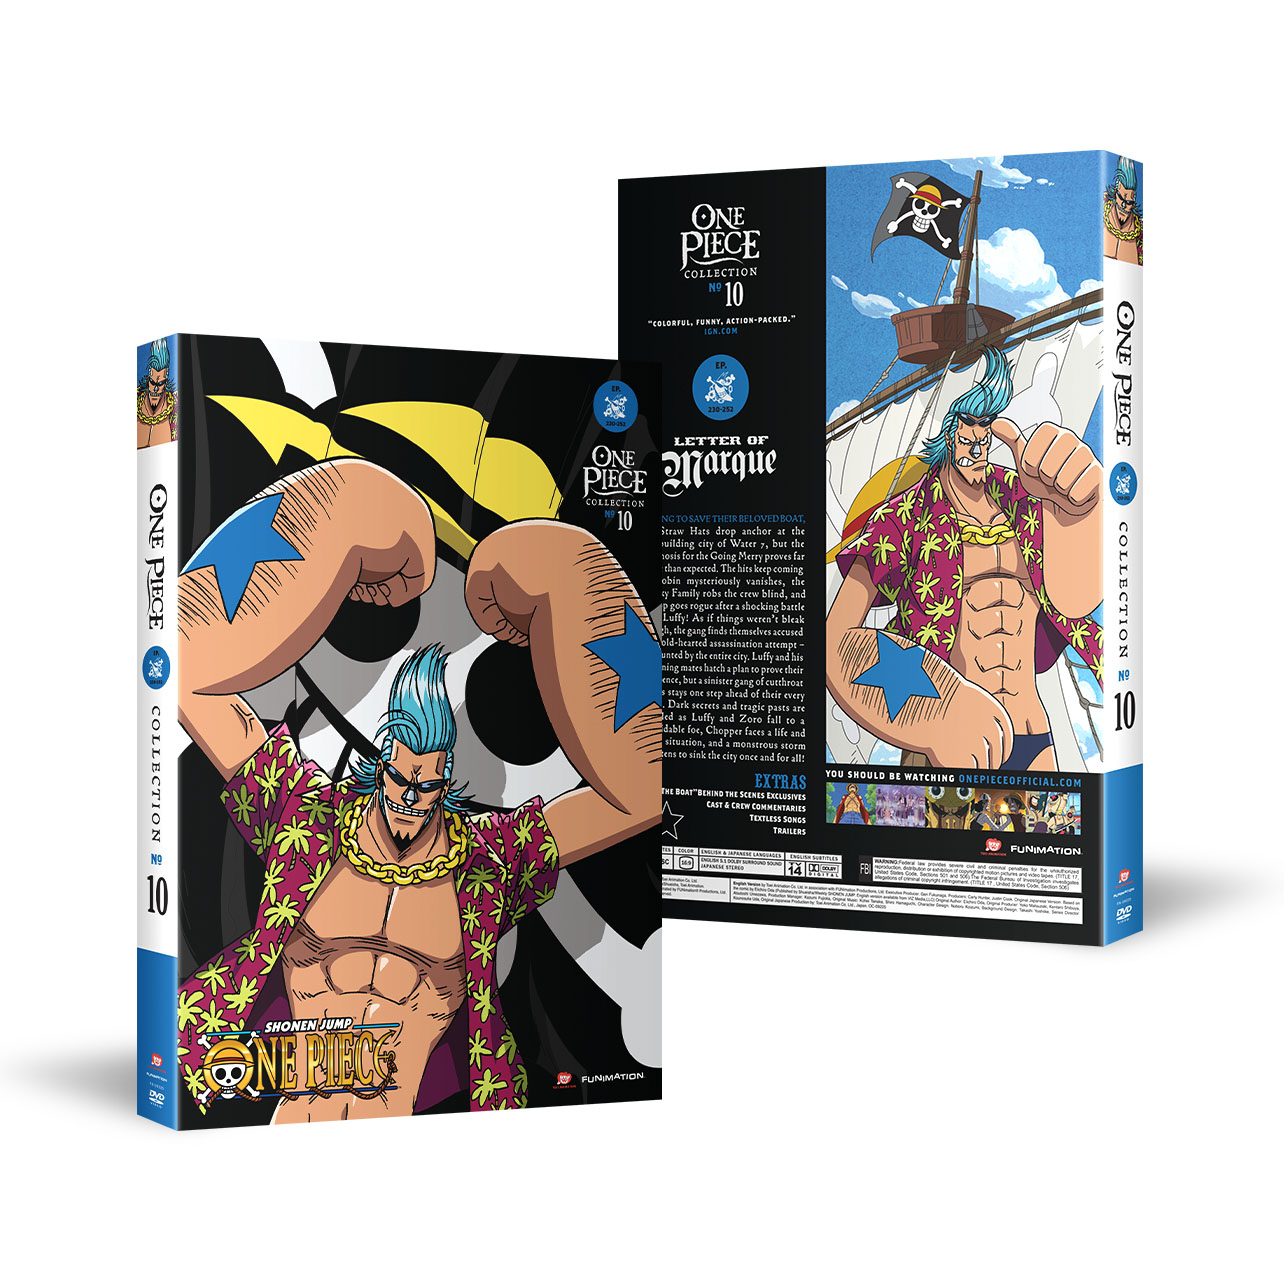 One Piece - Collection 10 - DVD image count 0